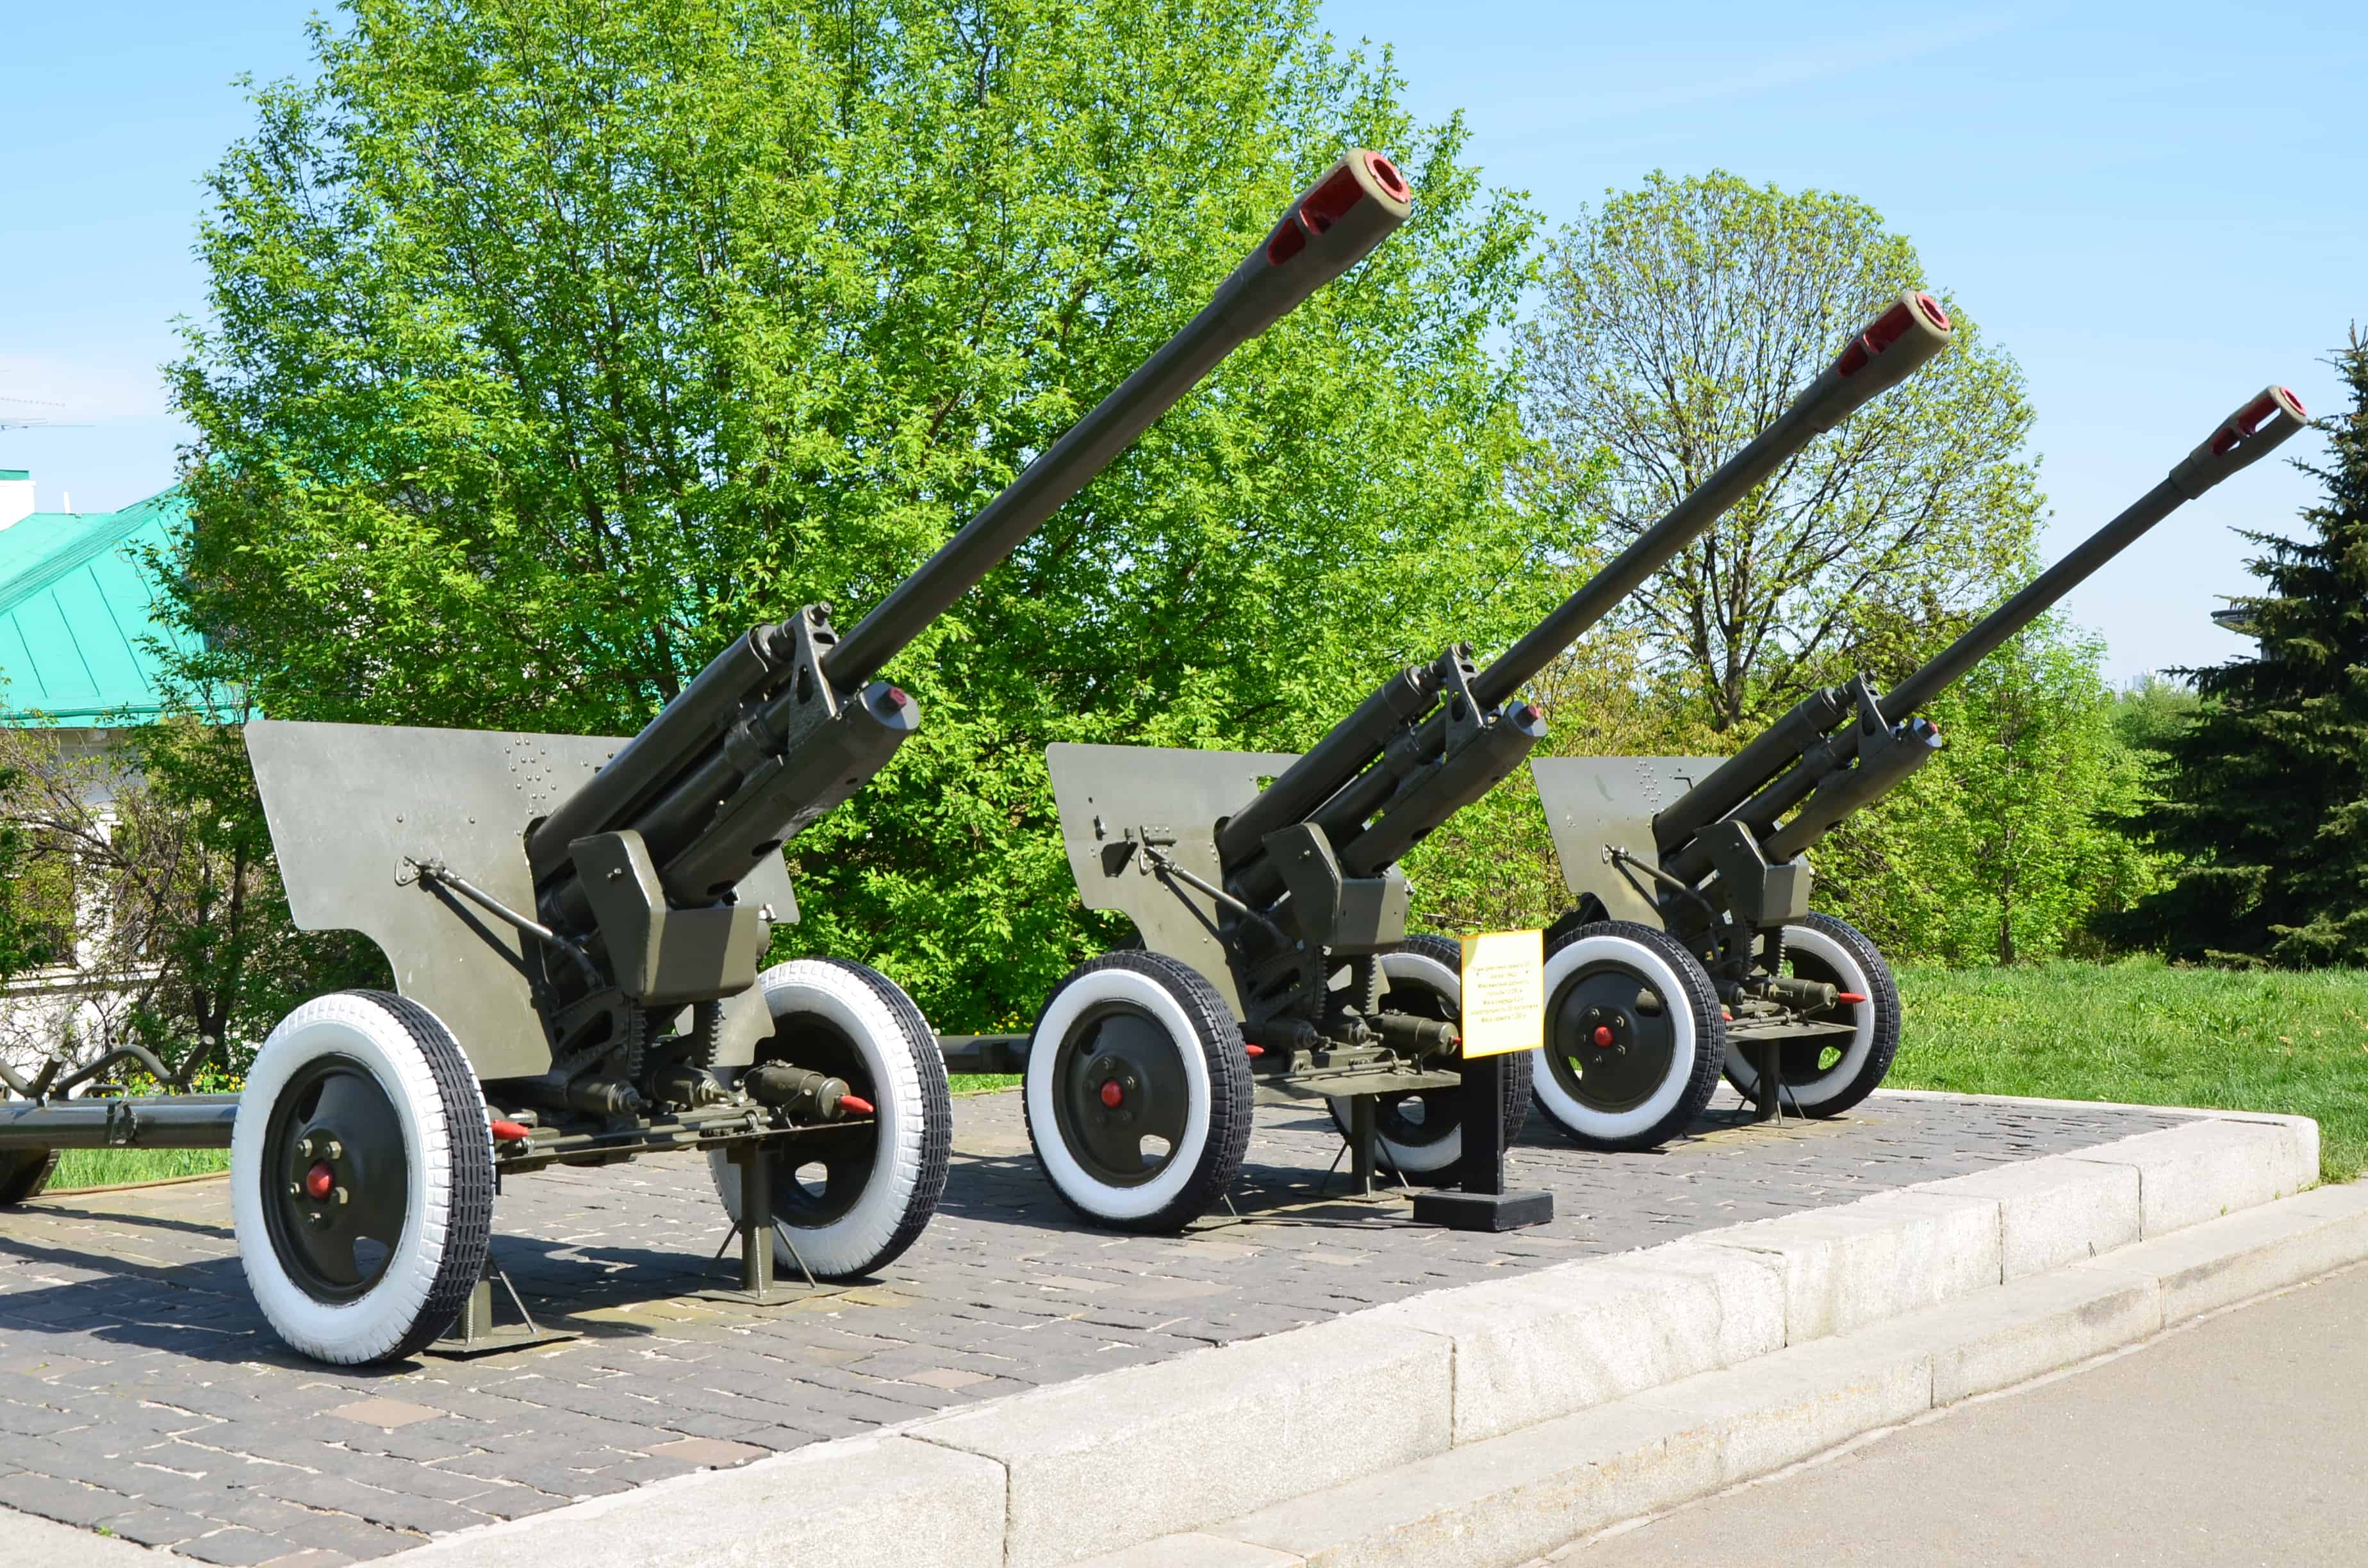 Cannons at the National Museum of the History of Ukraine in the Second World War Memorial Complex in Kyiv, Ukraine